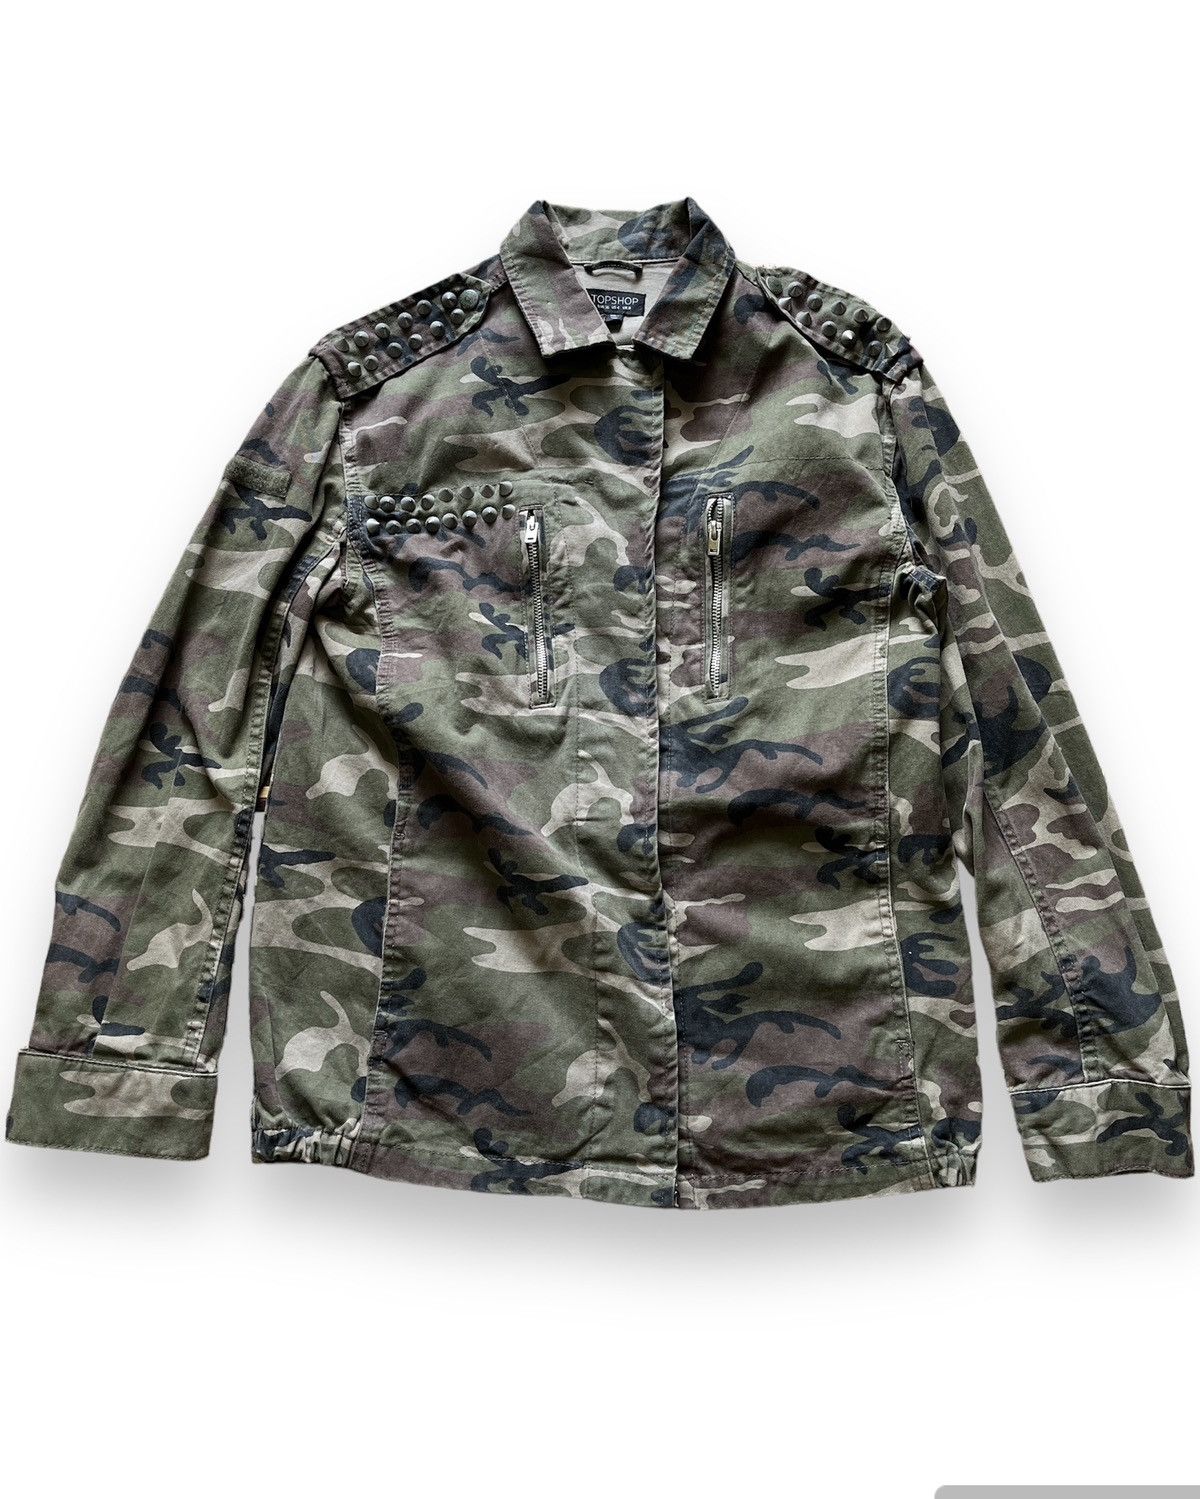 Military - Punk Army Seditionaries Jackets With Studs - 1